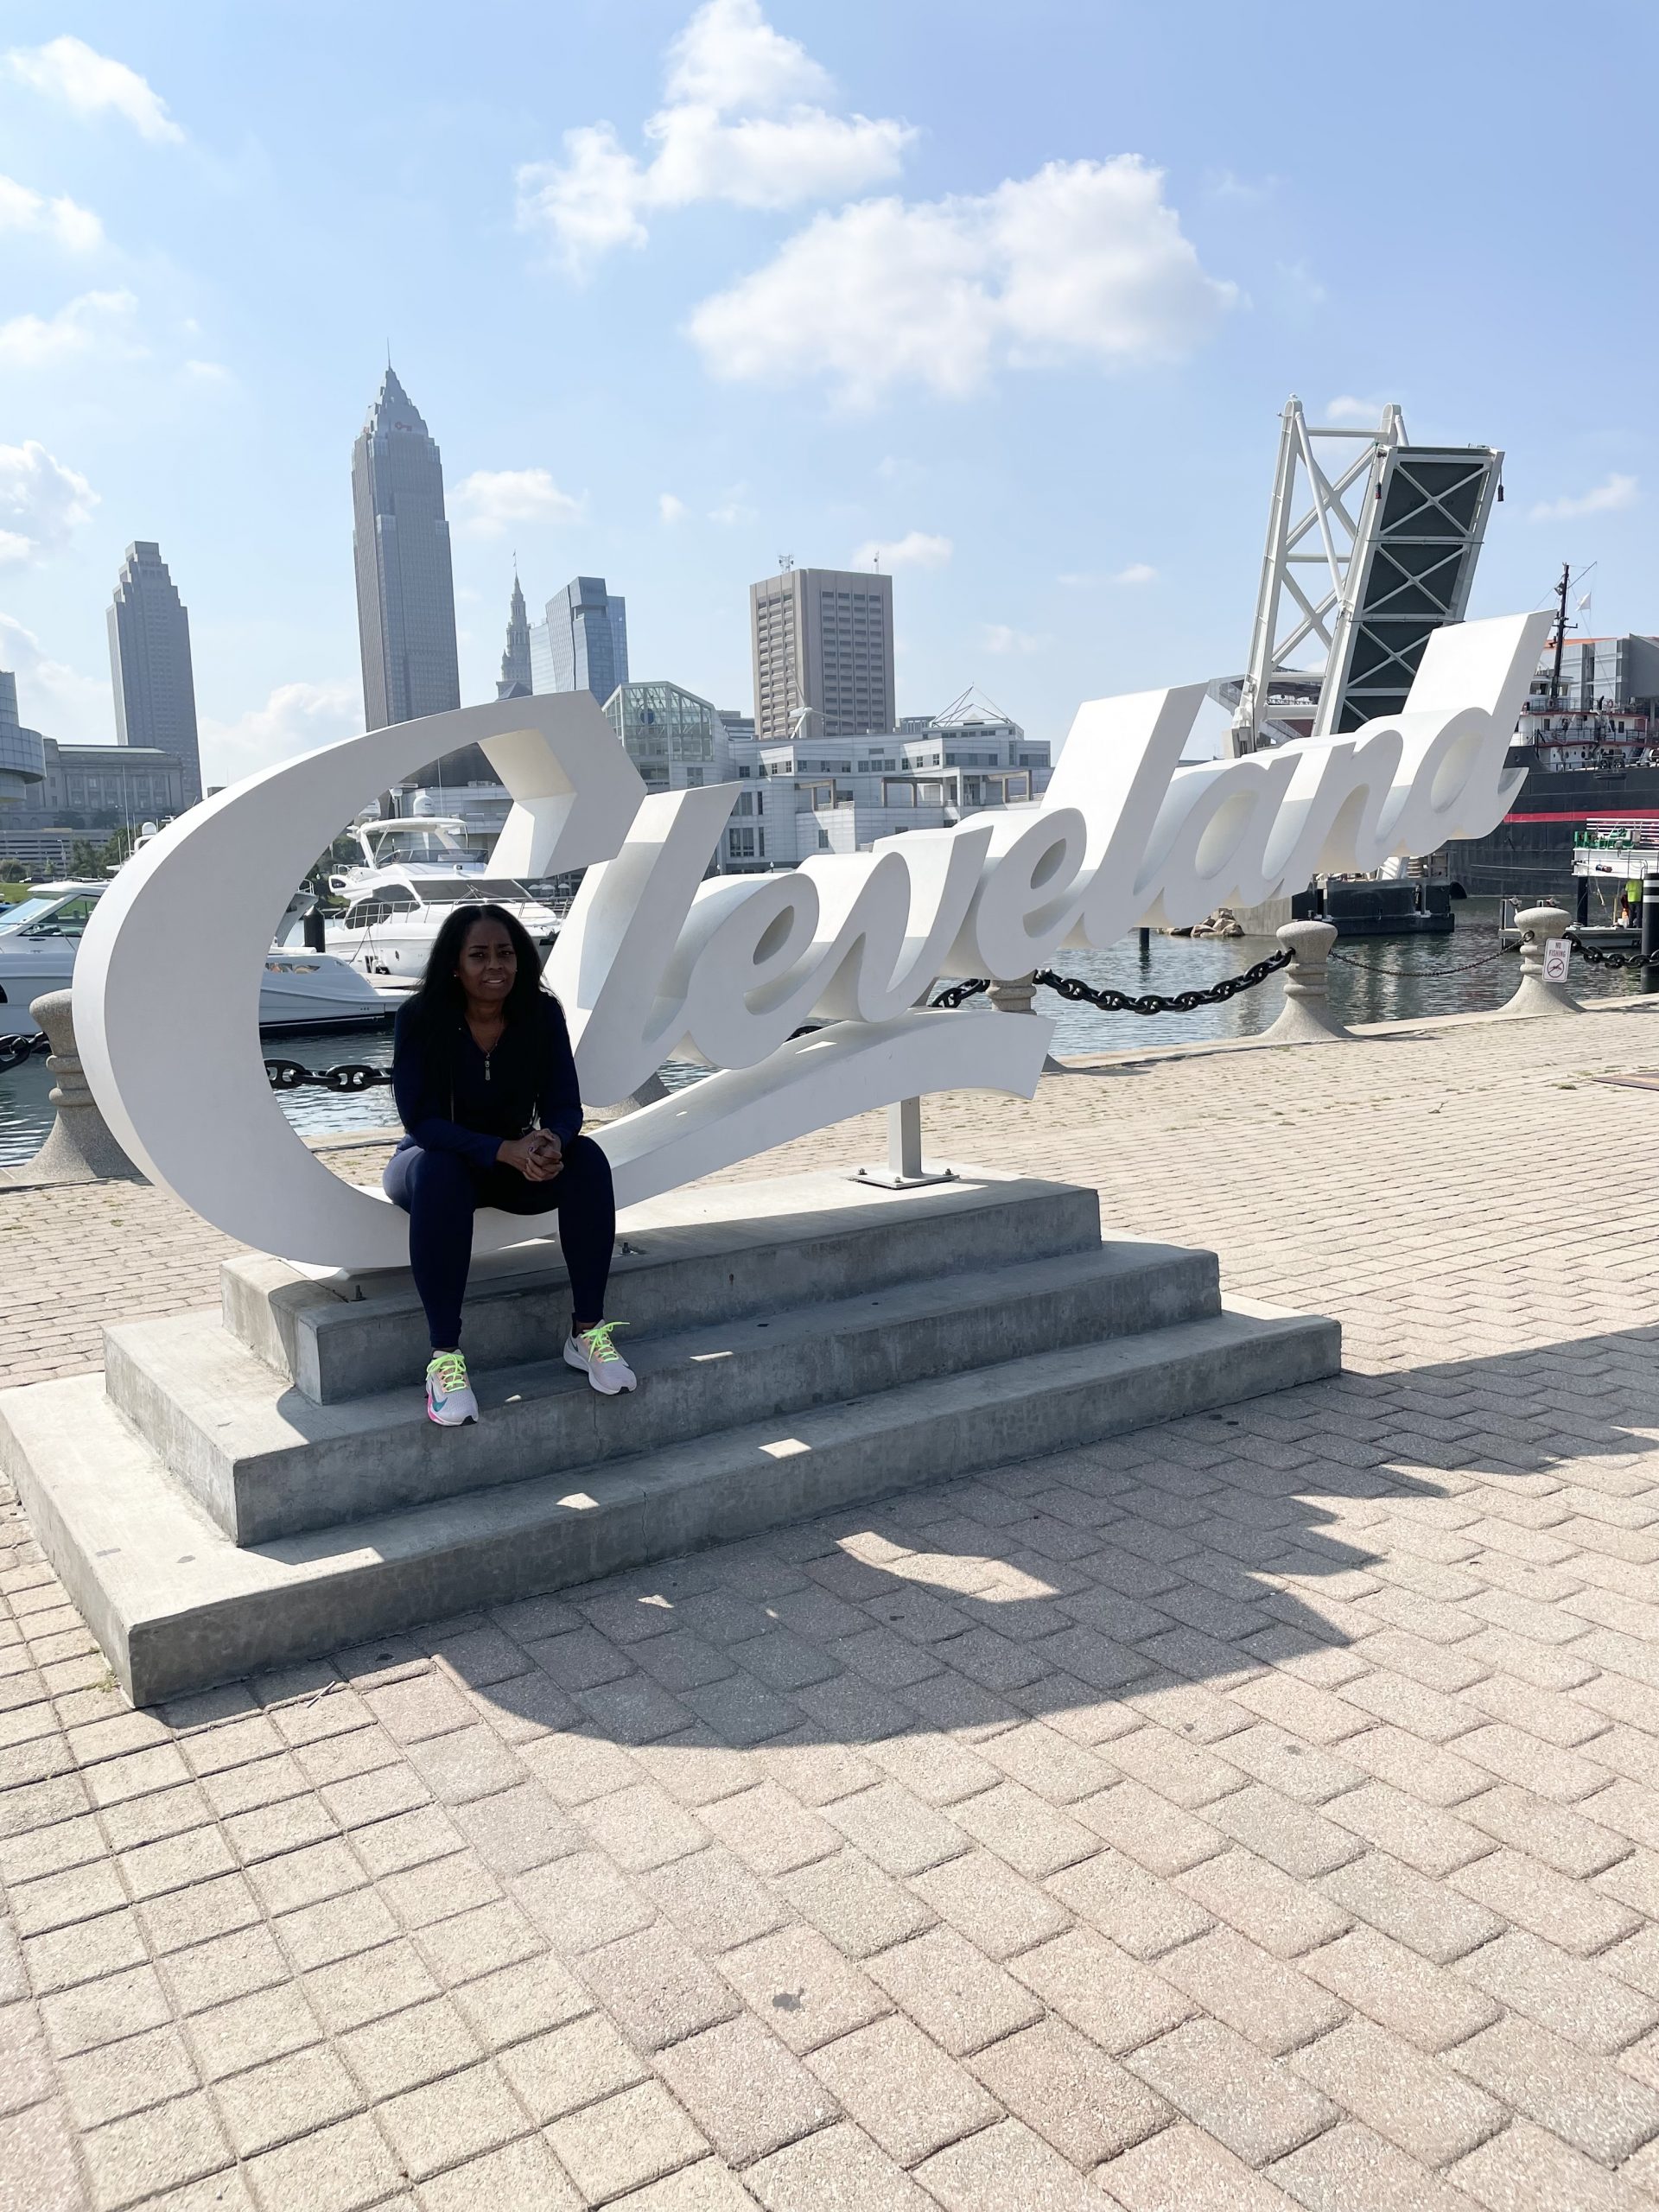 48 Hours In My Hometown Of Cleveland, Ohio